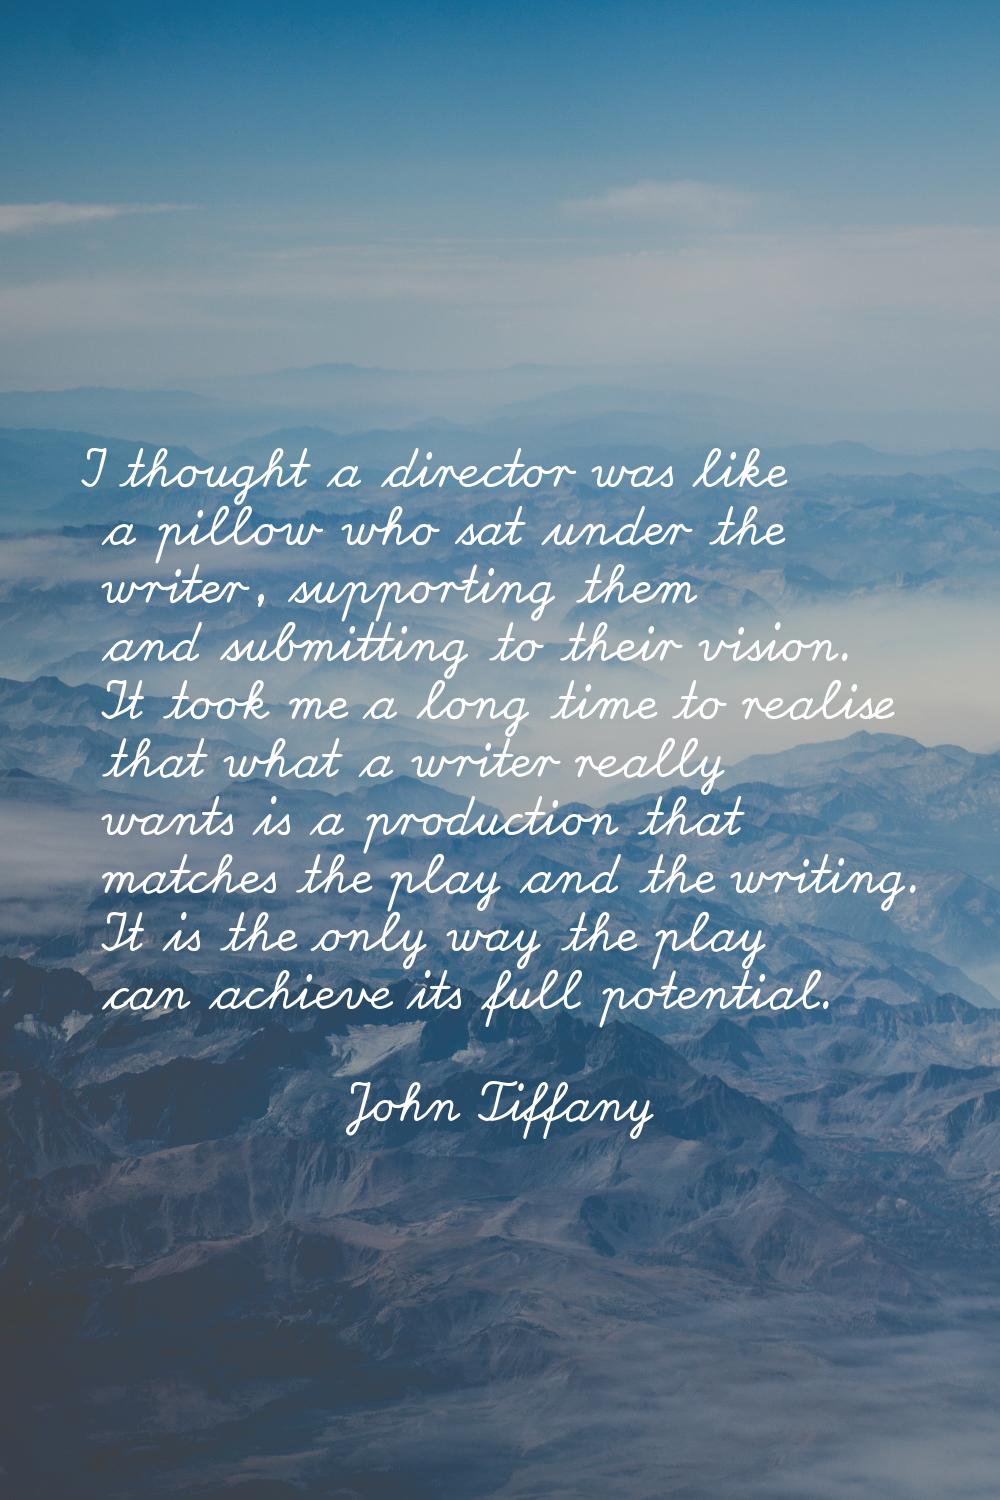 I thought a director was like a pillow who sat under the writer, supporting them and submitting to 